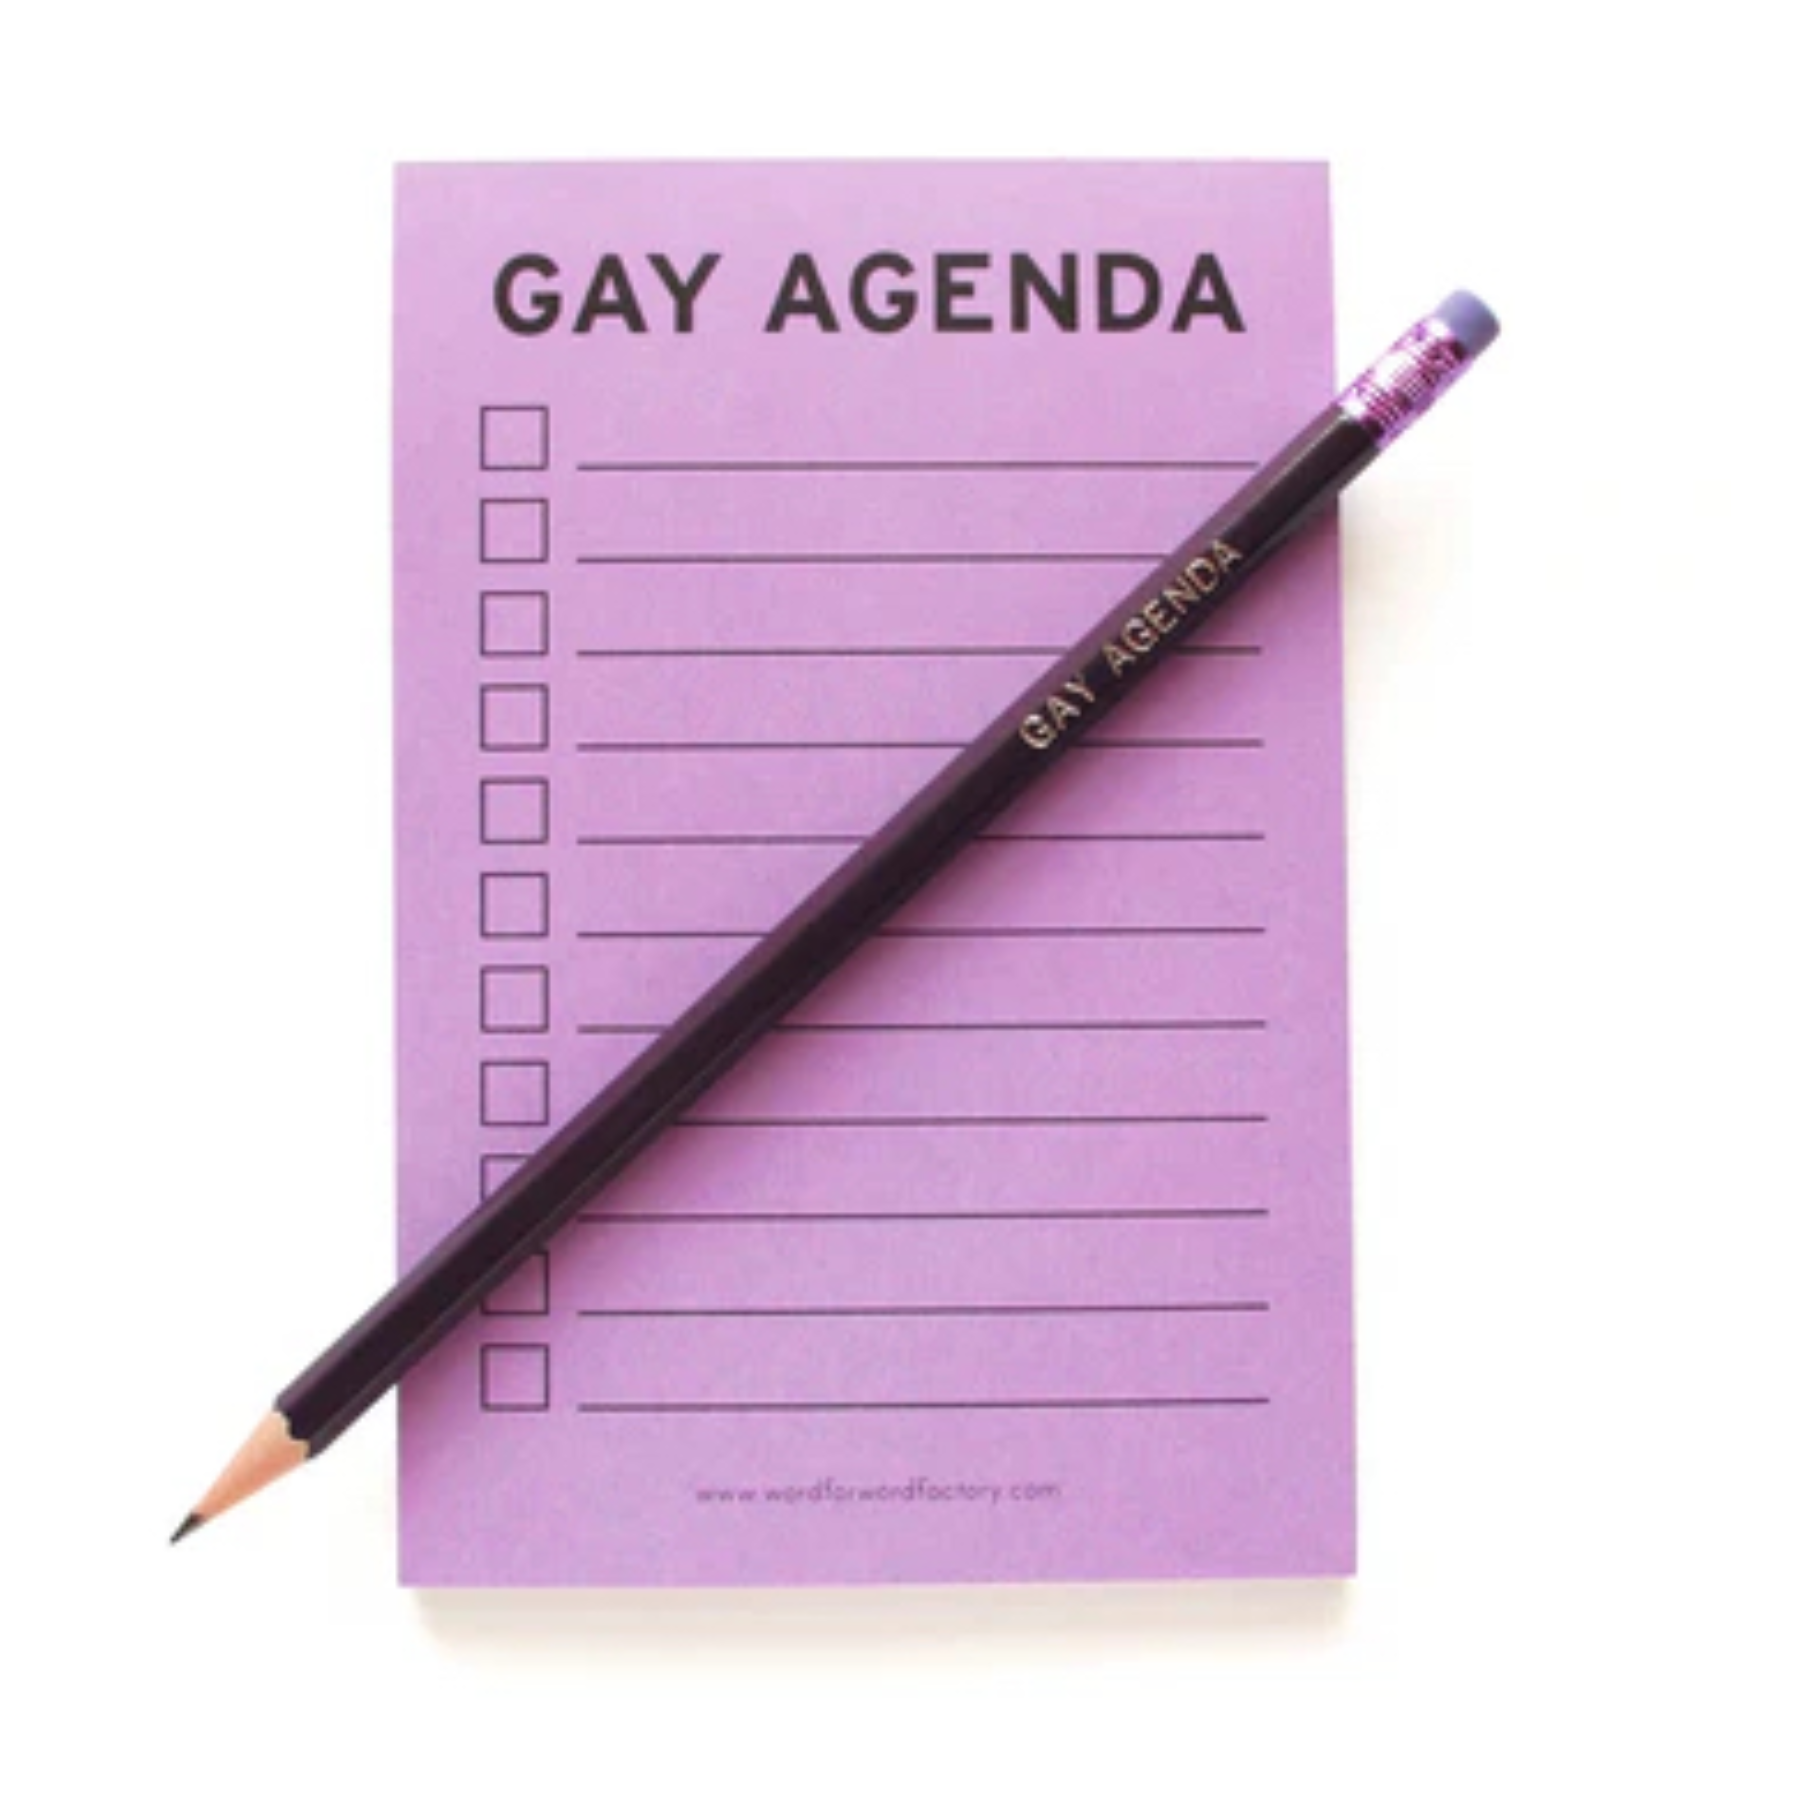 GAY AGENDA PENCIL SET by WORD FOR WORD